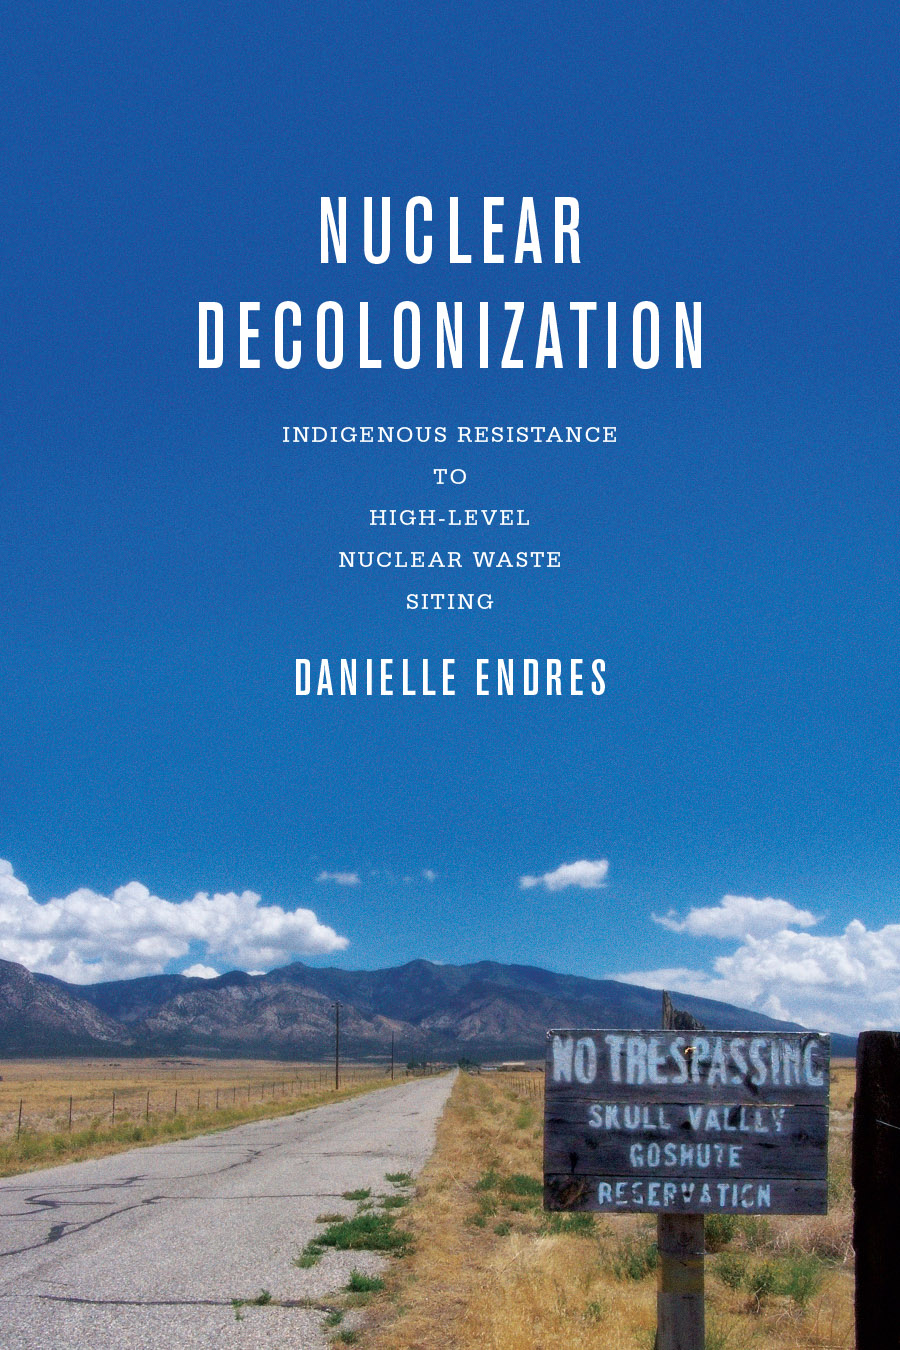 Front cover of Nuclear Decolonization: Indigenous Resistance to High-Level Nuclear Waste Siting, by Danielle Endres, featuring a photograph of a far-off mountain with a cracked asphalt road leading to it, with a sign in the foreground reading No Trespassing. Skull Valley Goshute Reservation.